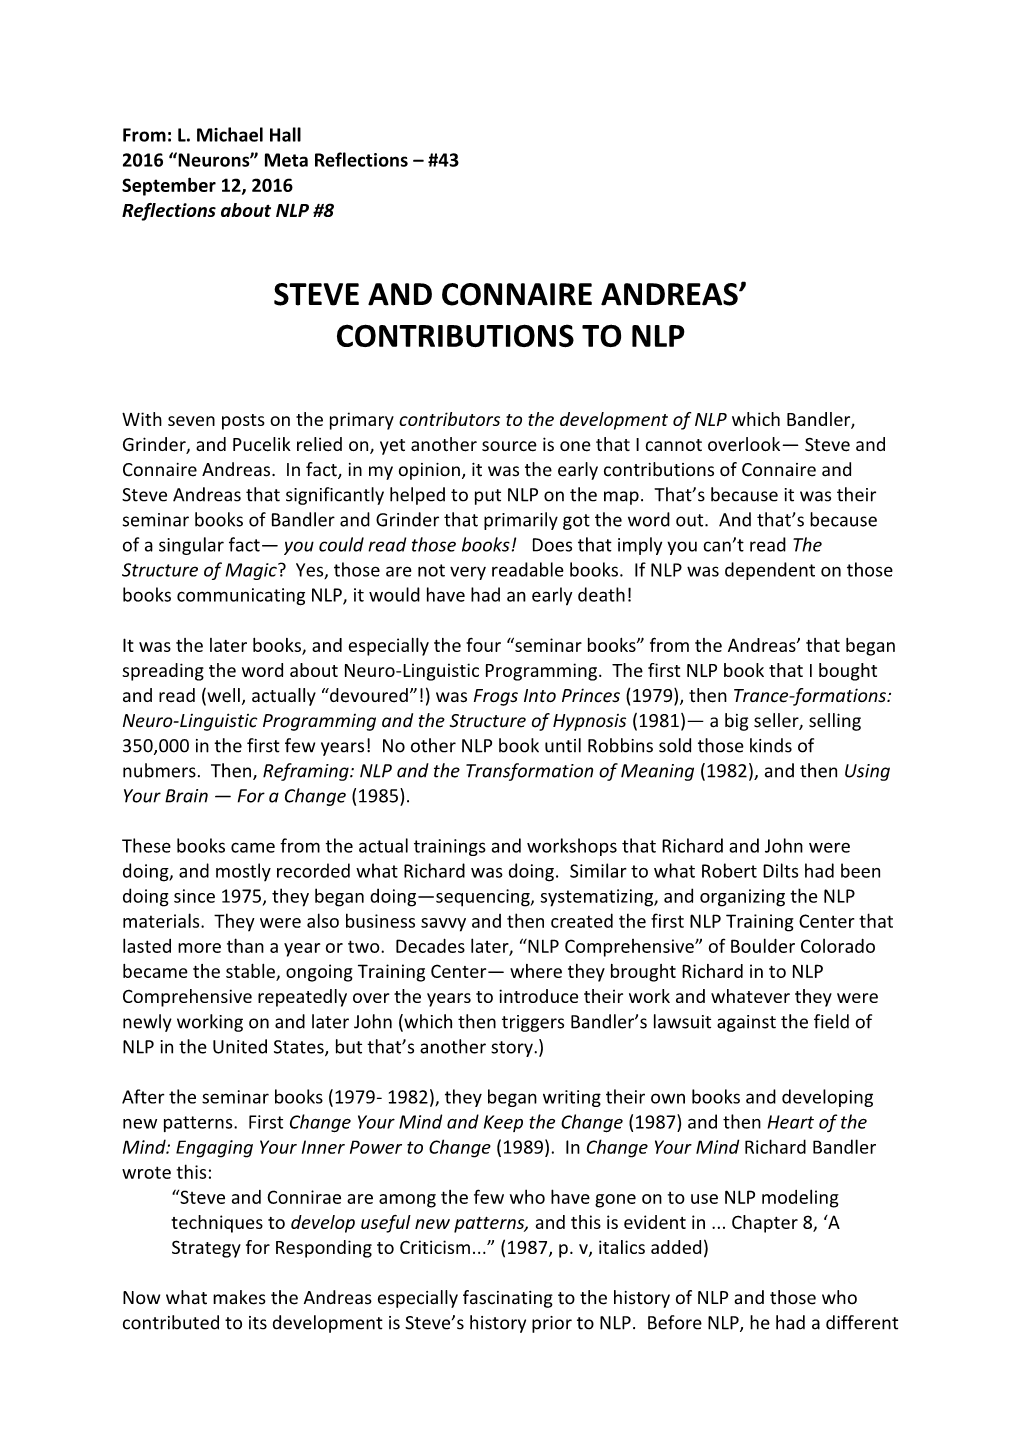 Steve and Connaire Andreas' Contributions To